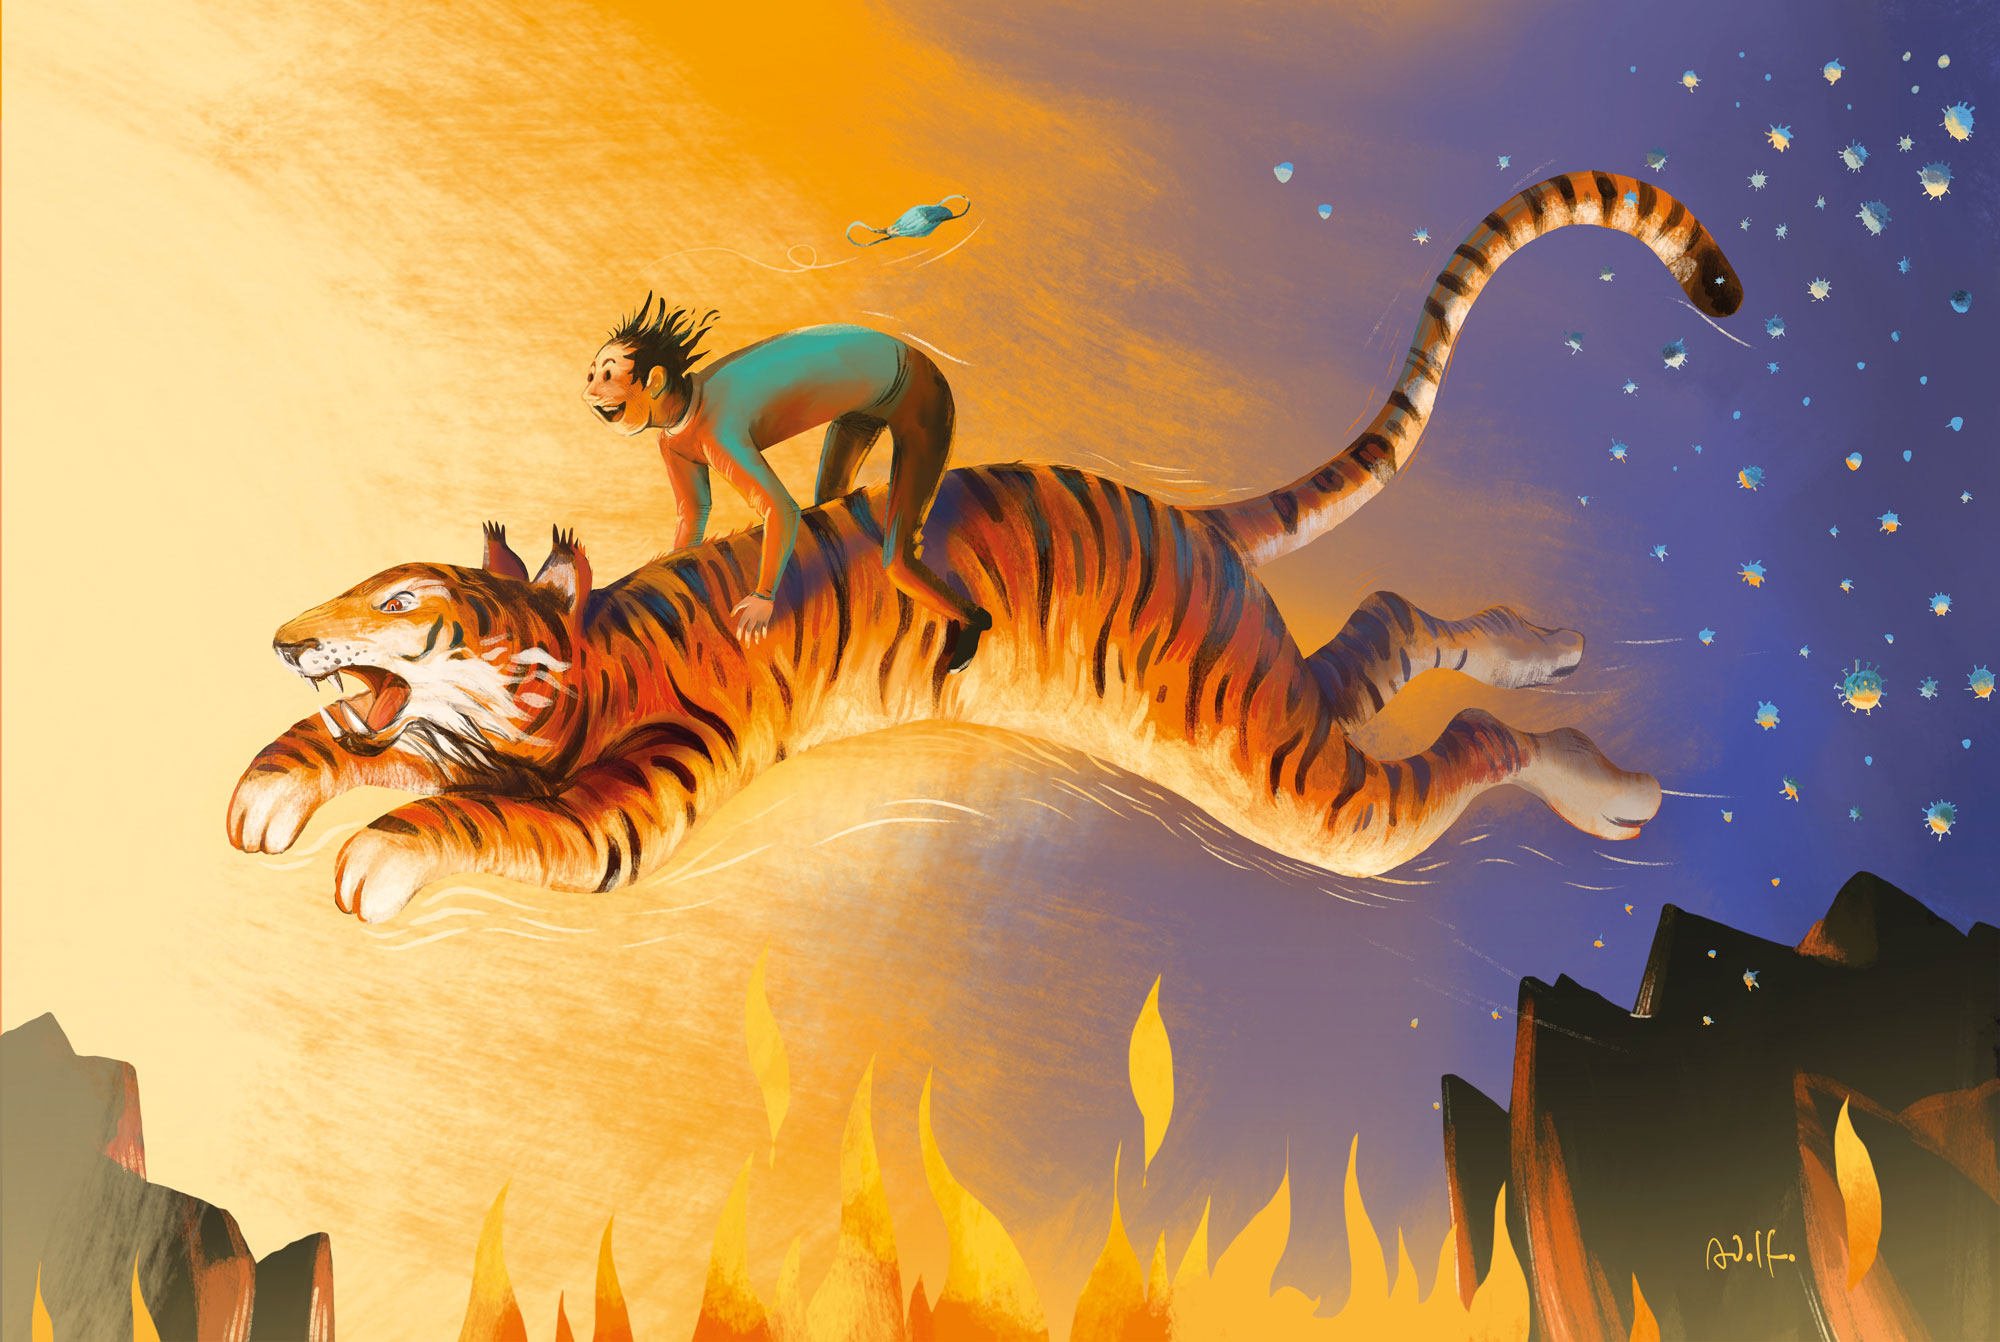 Feng shui experts reveal which zodiac signs will bring the most and the least luck in the fast approaching Year of the Tiger. Illustration: Adolfo Arranz